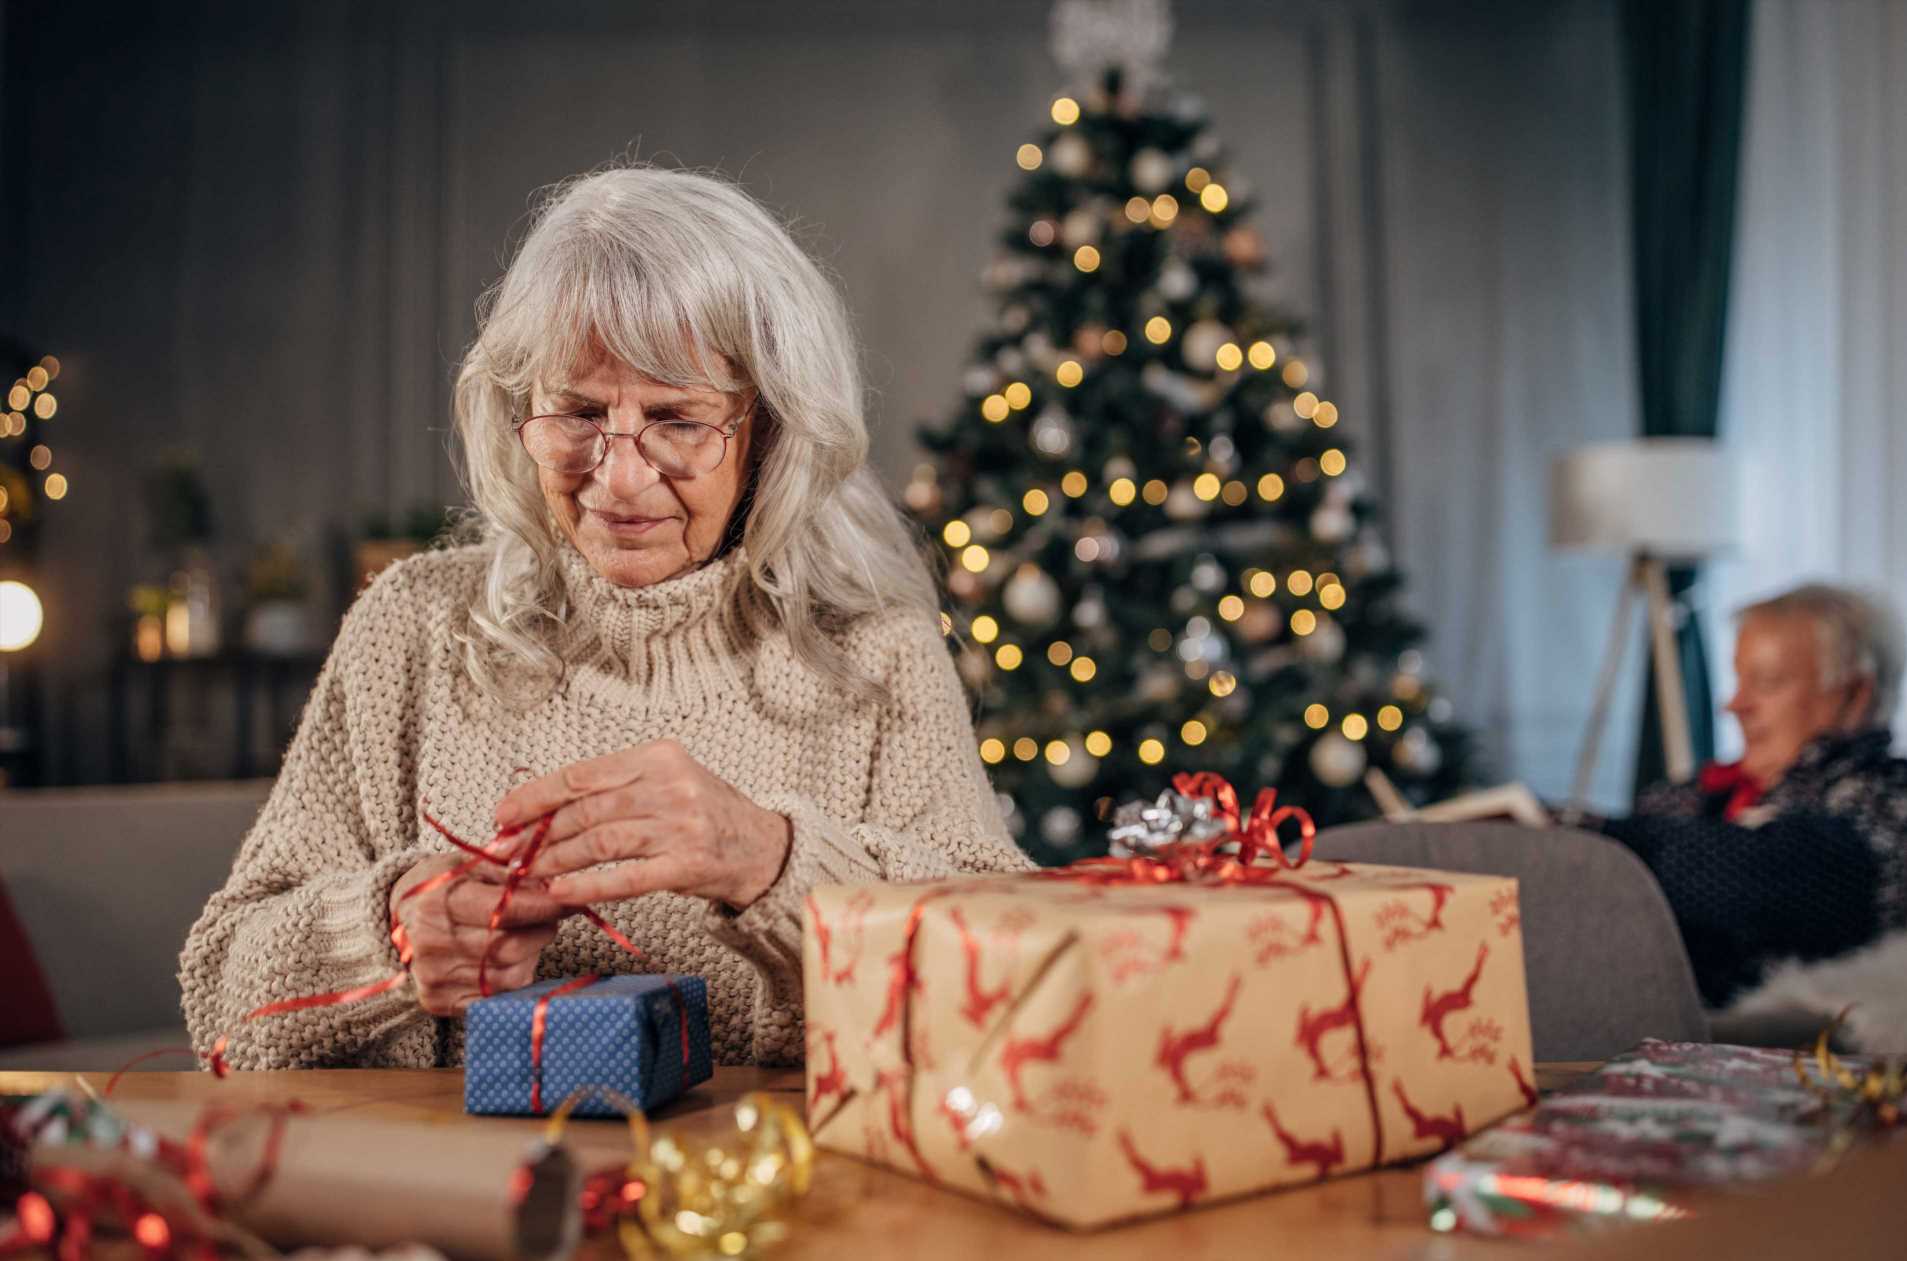 The 8 cancer symptoms you might notice while wrapping Christmas presents revealed | The Sun